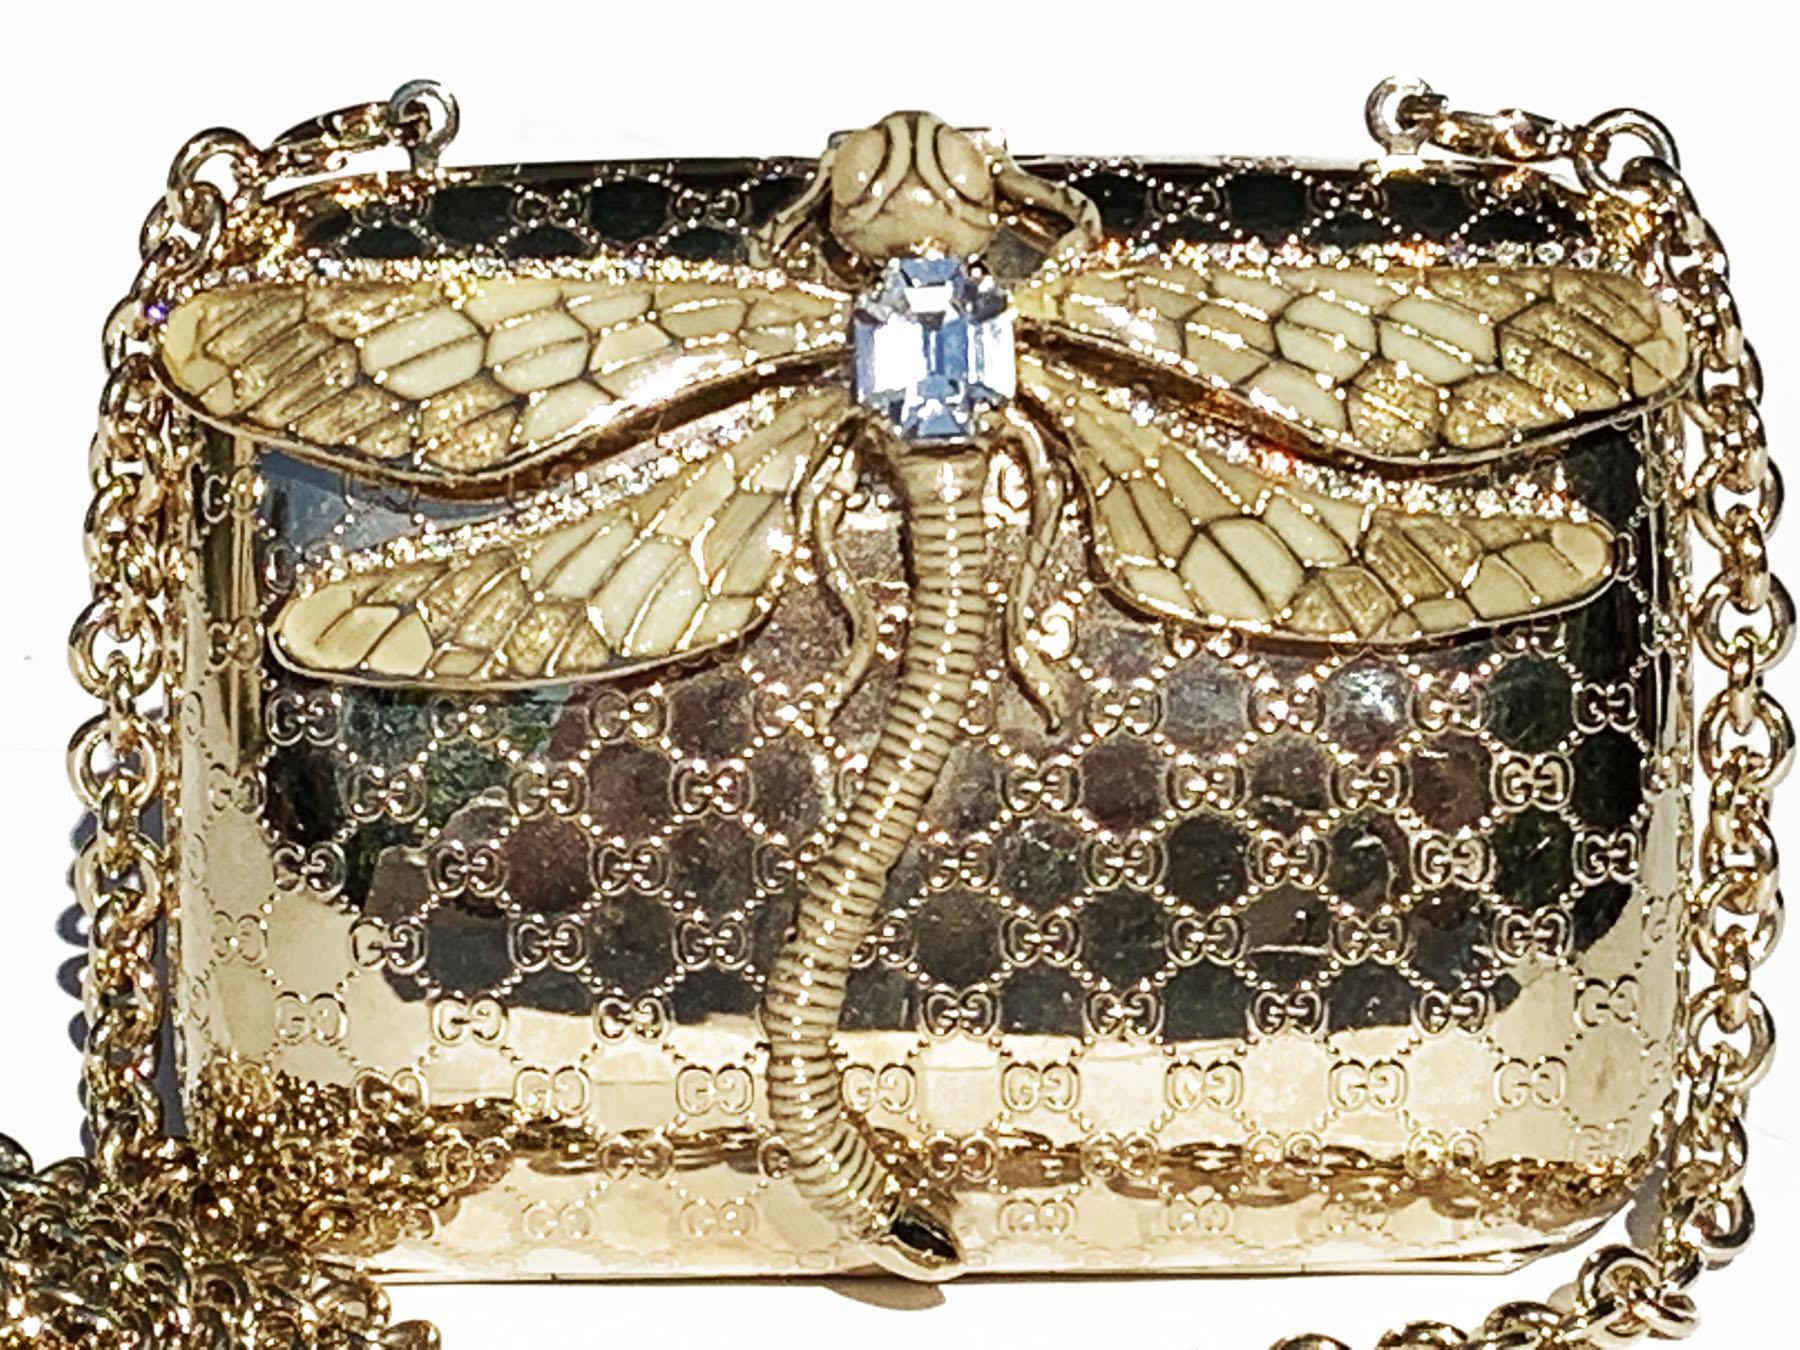 Tom Ford for Gucci Gold Dragonfly Minaudiere in Micro Guccissima Embossed Gold tone Metal and Enamel Clutch
2000